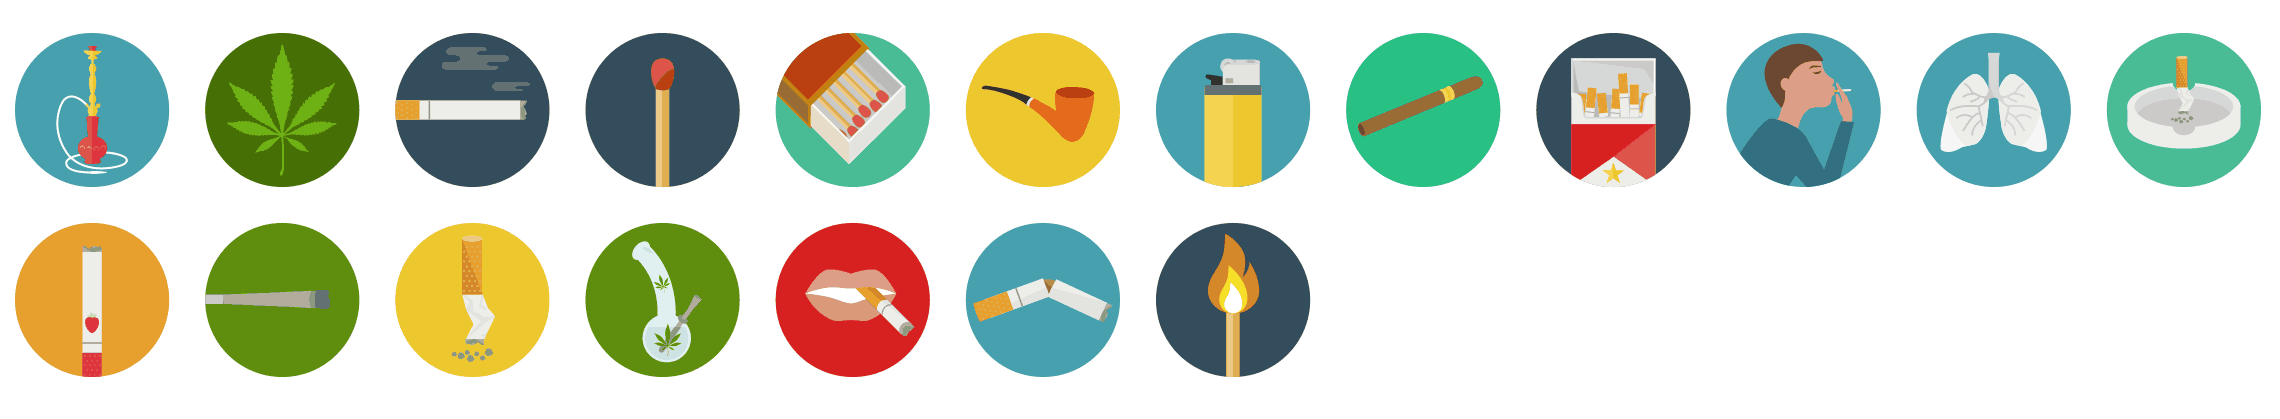 smoking-flat-icons-vol-1-preview